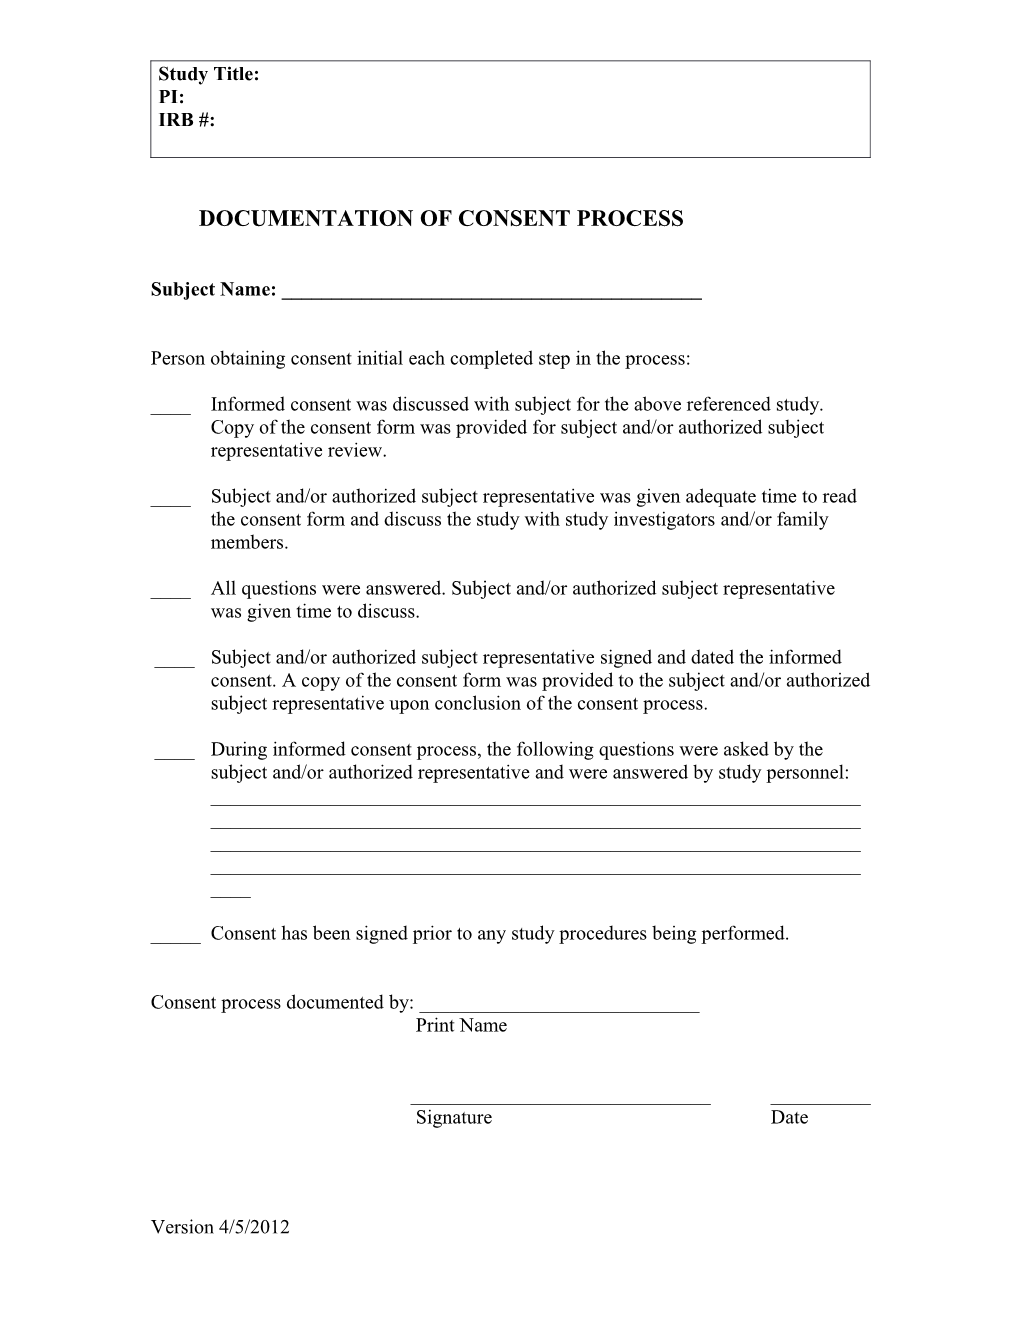 Checklist for Documenting Informed Consent